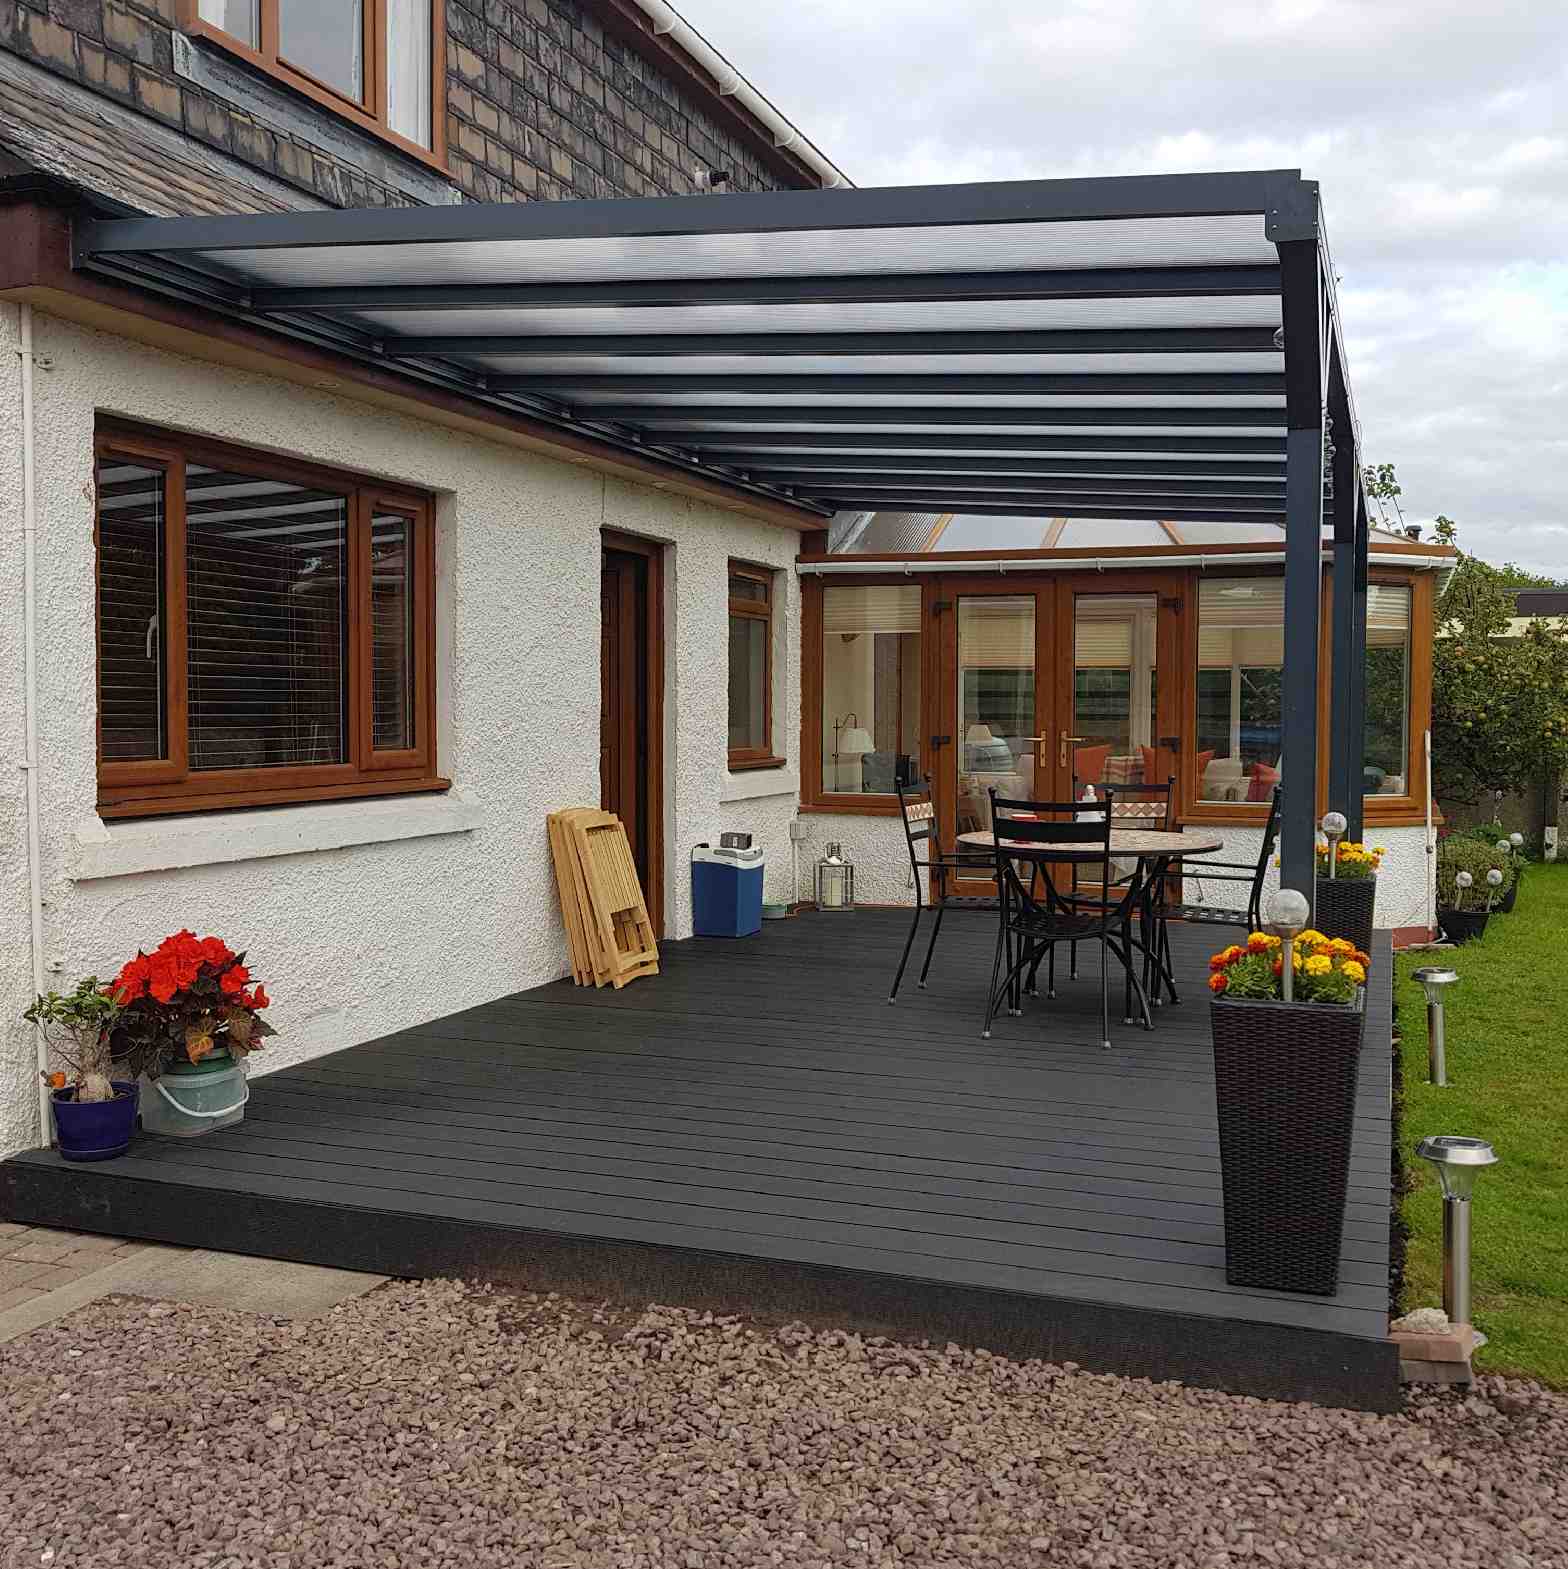 Buy Omega Verandah, Anthracite Grey, 16mm Polycarbonate Glazing - 10.6m (W) x 3.5m (P), (5) Supporting Posts online today